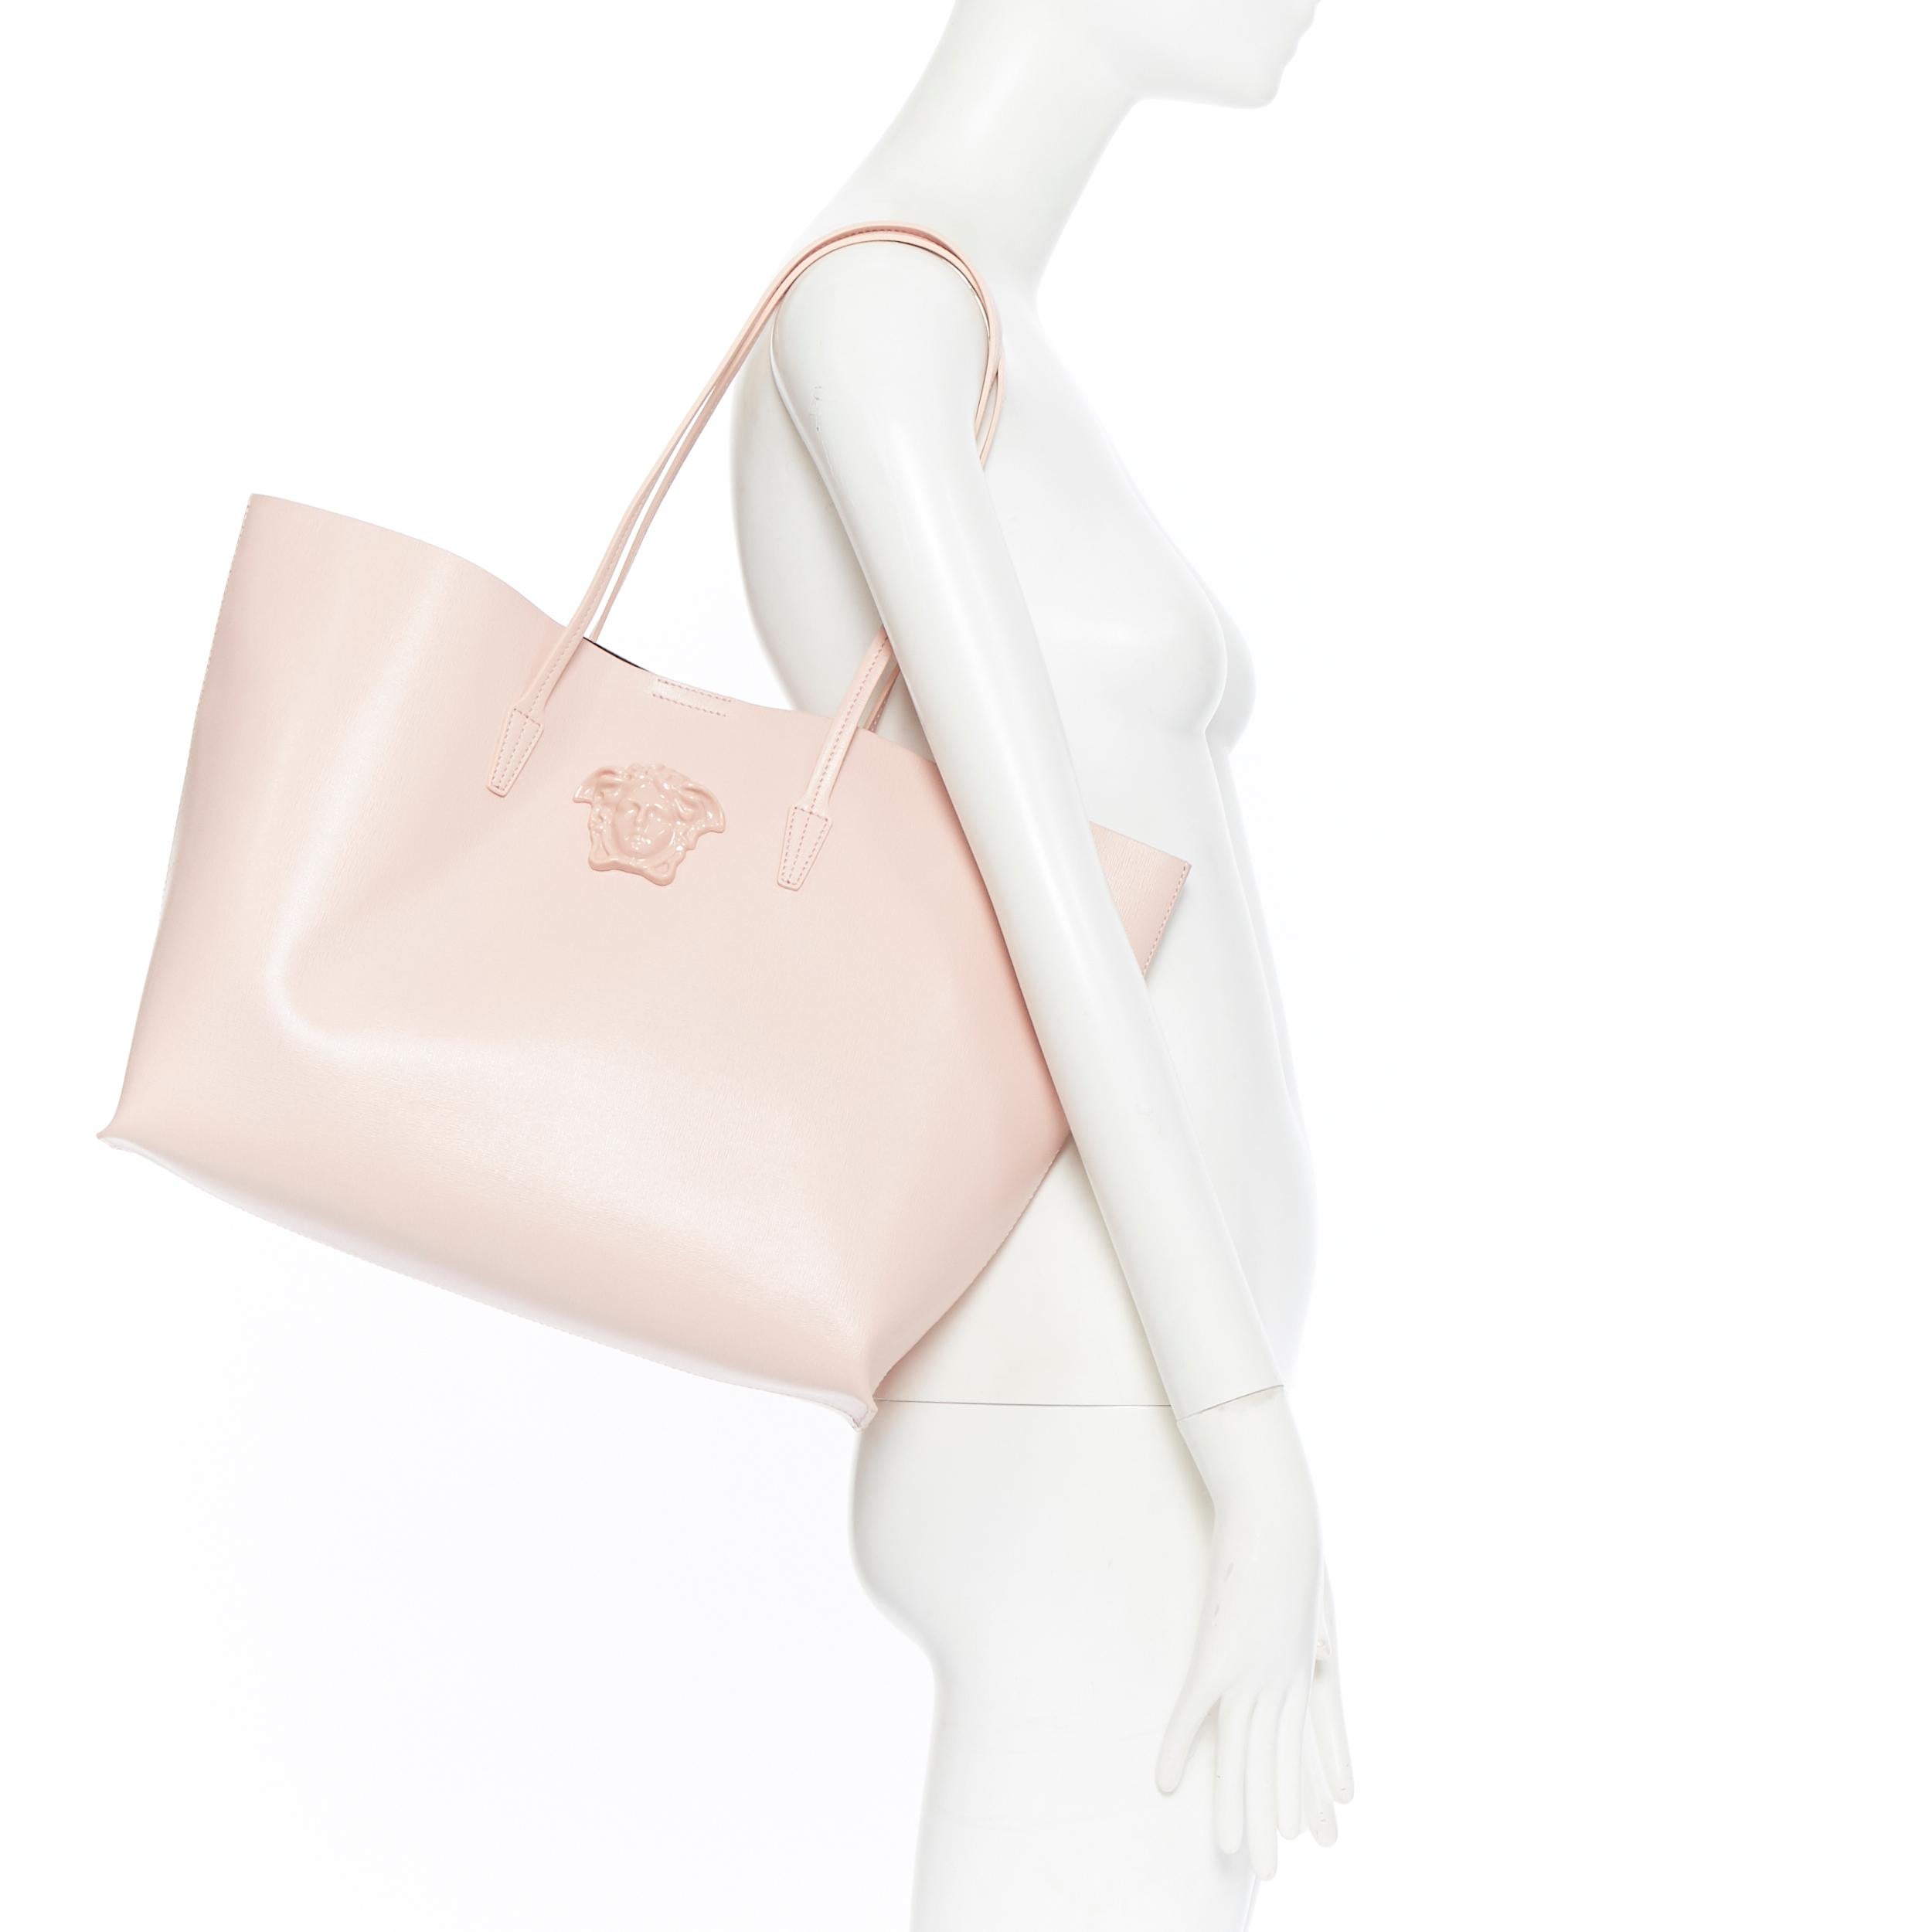 new VERSACE Palazzo Medusa light pink saffiano leather large neverfull tote bag
Brand: Versace
Designer: Donatella Versace
Model Name / Style: Palazzo Medusa tote
Material: Leather; saffiano leather
Color: Pink
Pattern: Solid
Closure: Magnetic
Extra